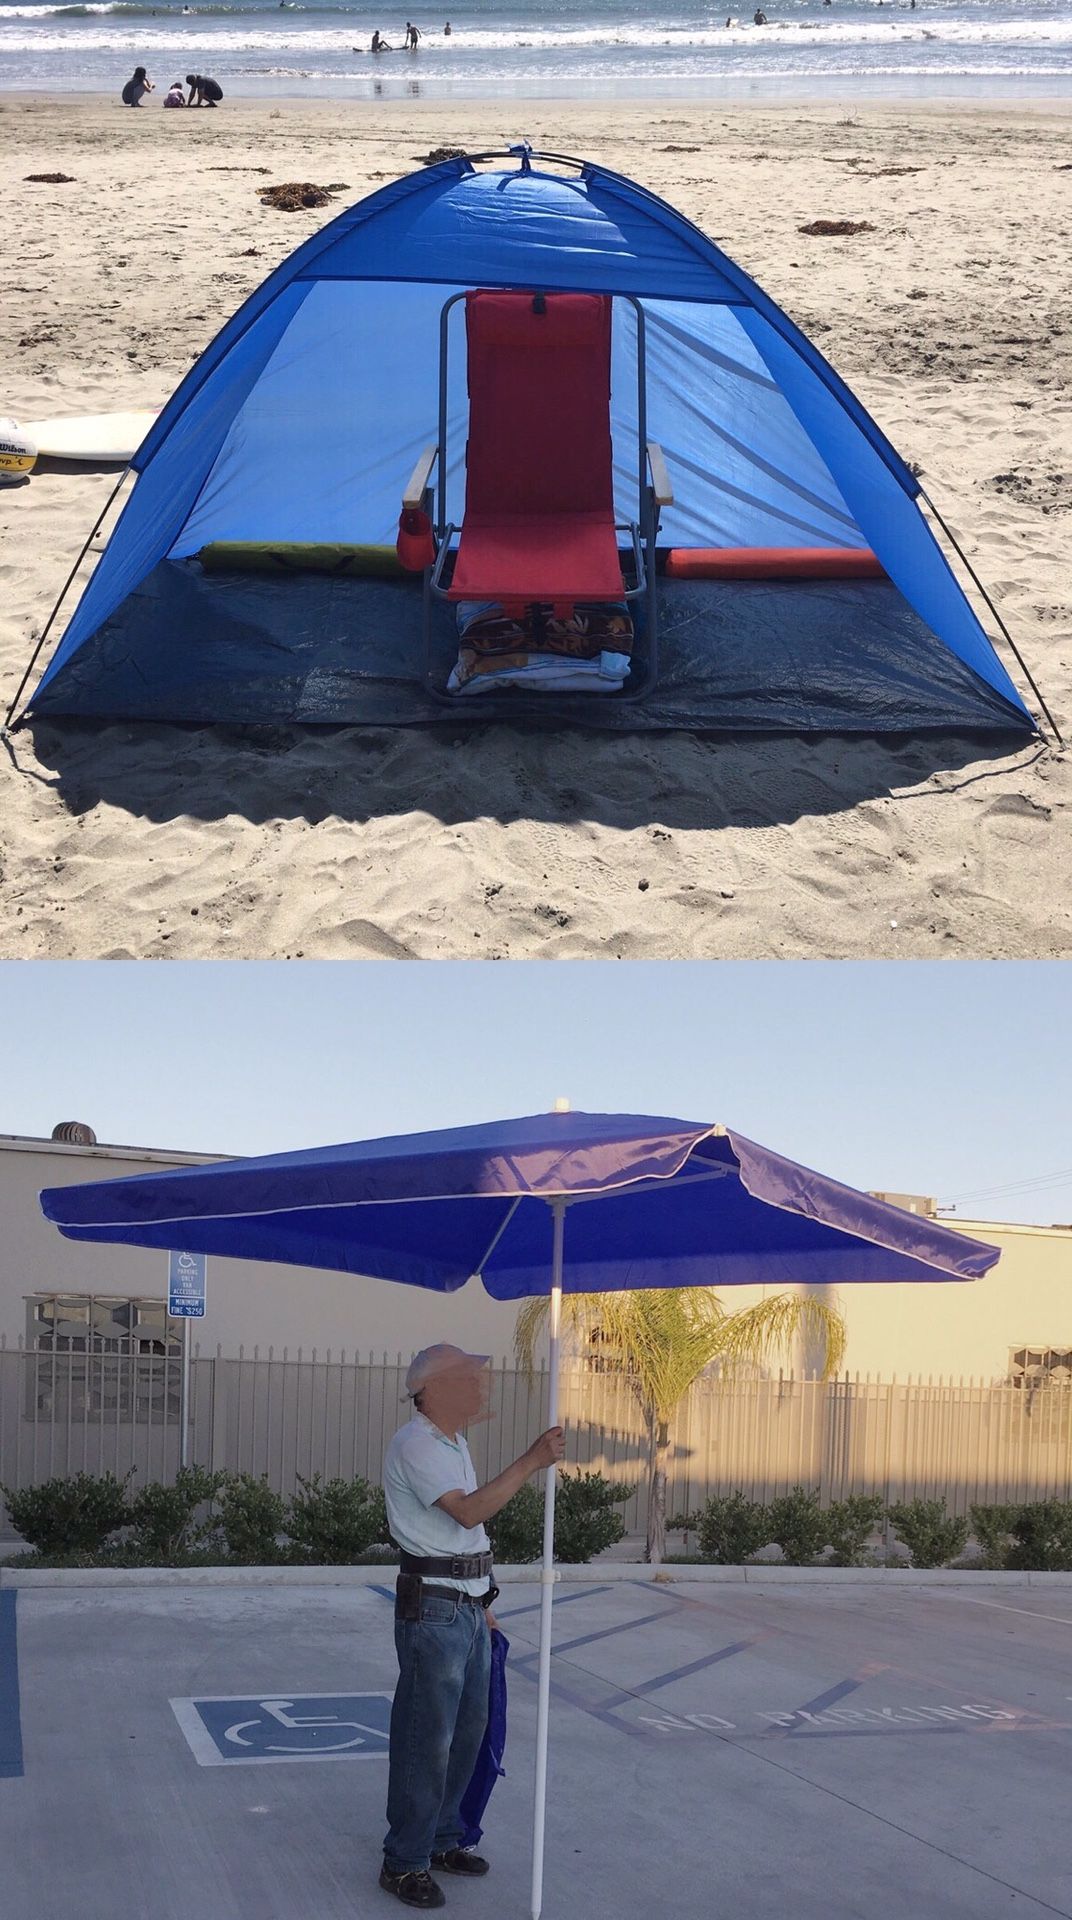 New 2 items for $40 7x3 feet beach tent sun shade and 6.5x6.5 feet beach umbrella with carrying bags